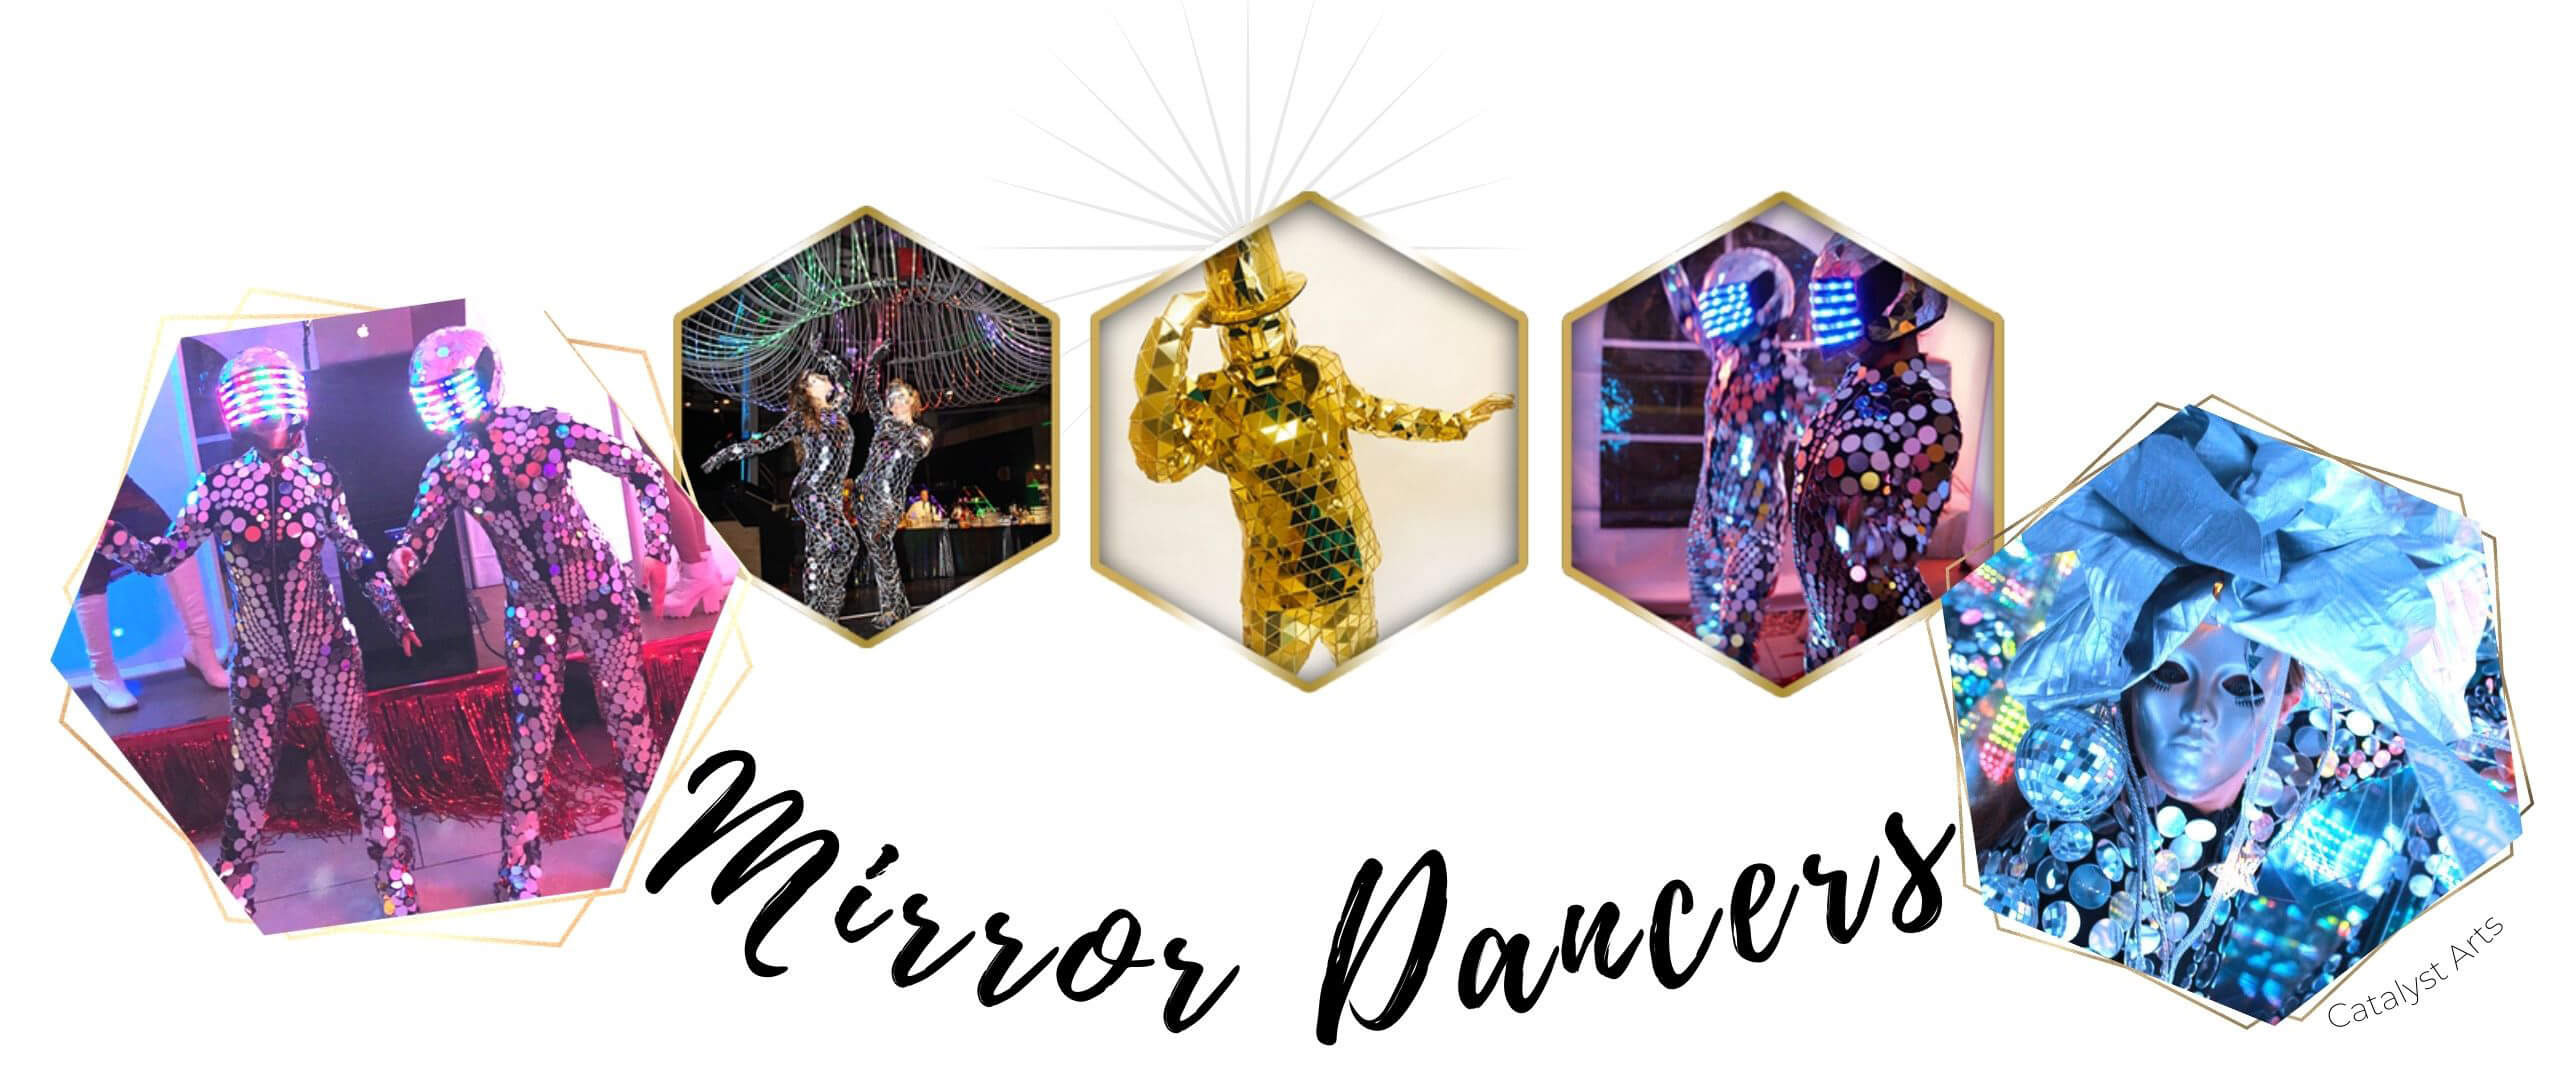 Mirror suit dancers & mirror performers for events by Catalyst Arts California 